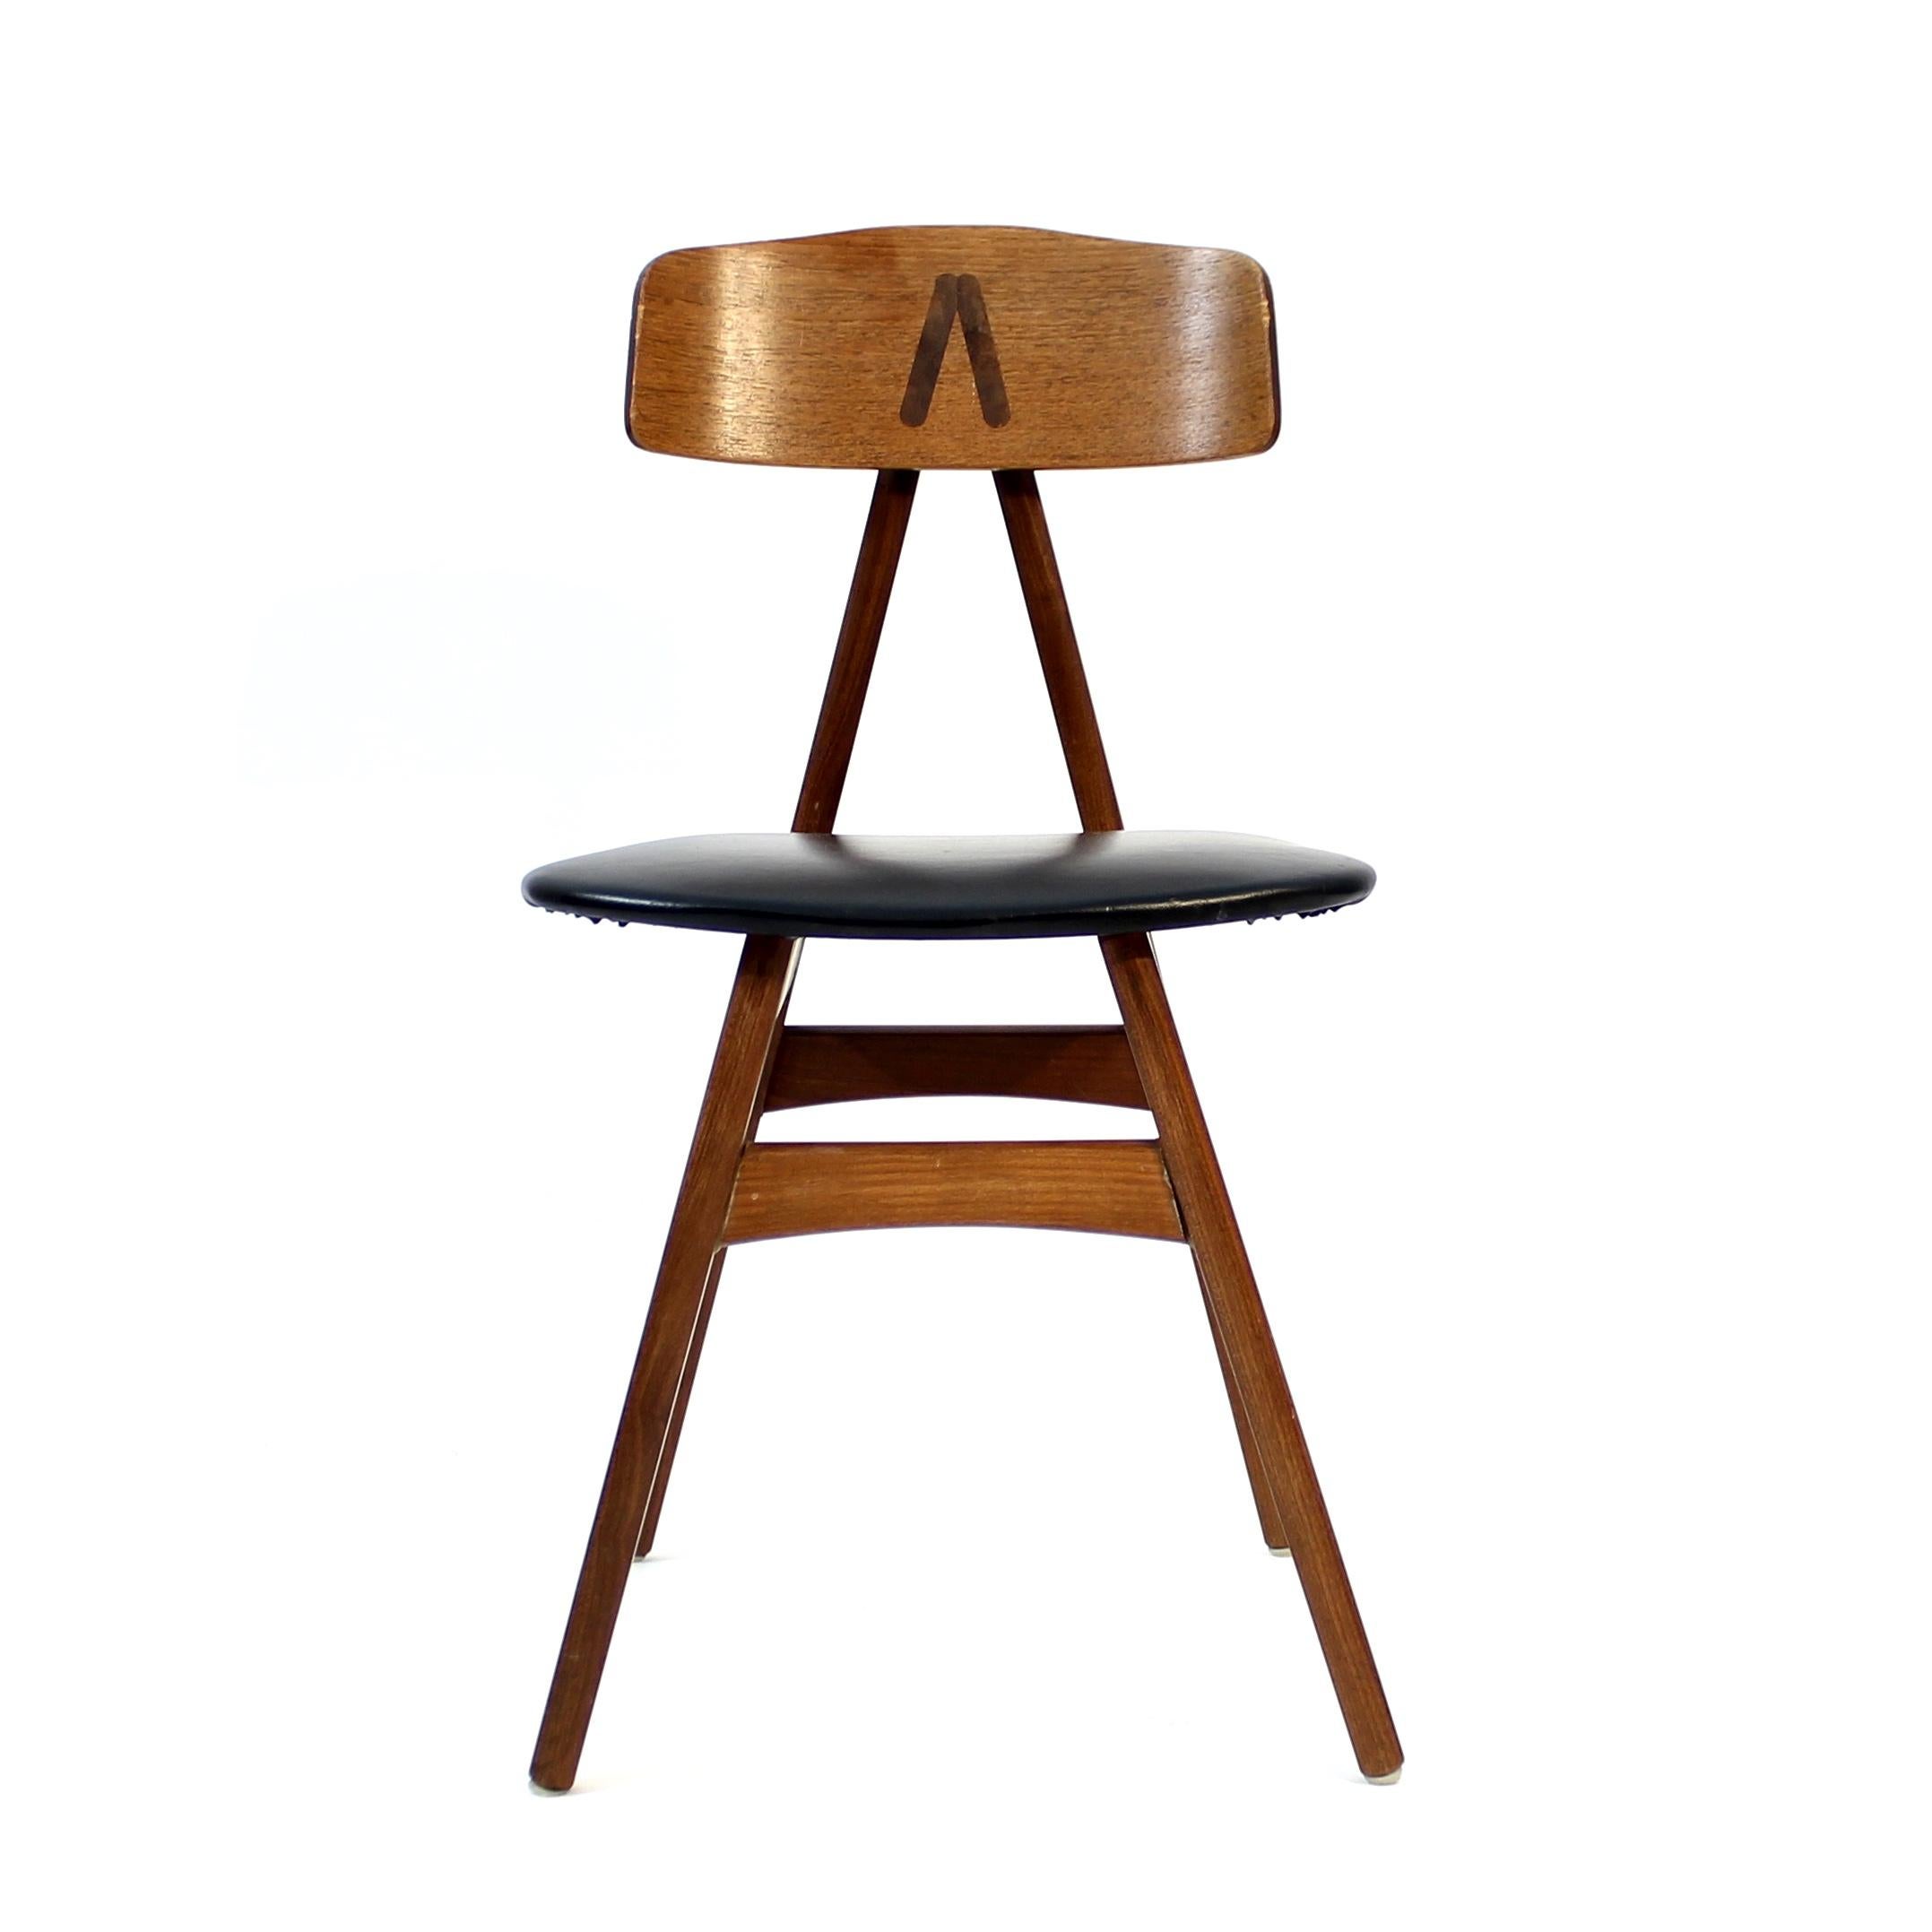  A-shaped teak chair with the original faux leather upholstery designed by Bengt Ruda for IKEA a in 1959. The chair made its debut in the Ikea catalogue of 1960 and were only produced for a few years so not very many were made. As much of the early